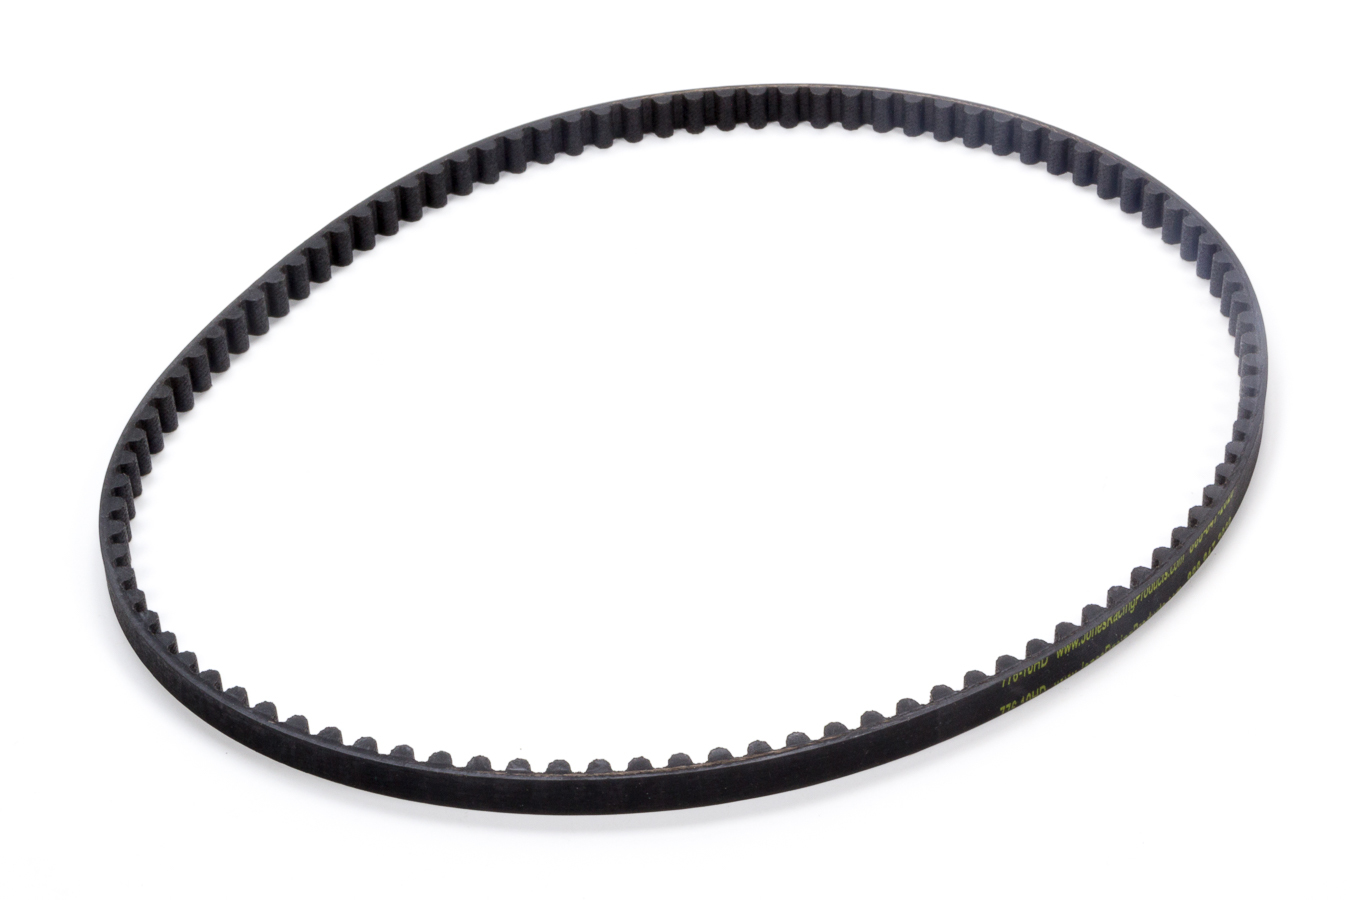 Jones Racing Products 776-10HD HTD Drive Belt, 30.550 in Long, 10 mm Wide, 8 mm Pitch, Each